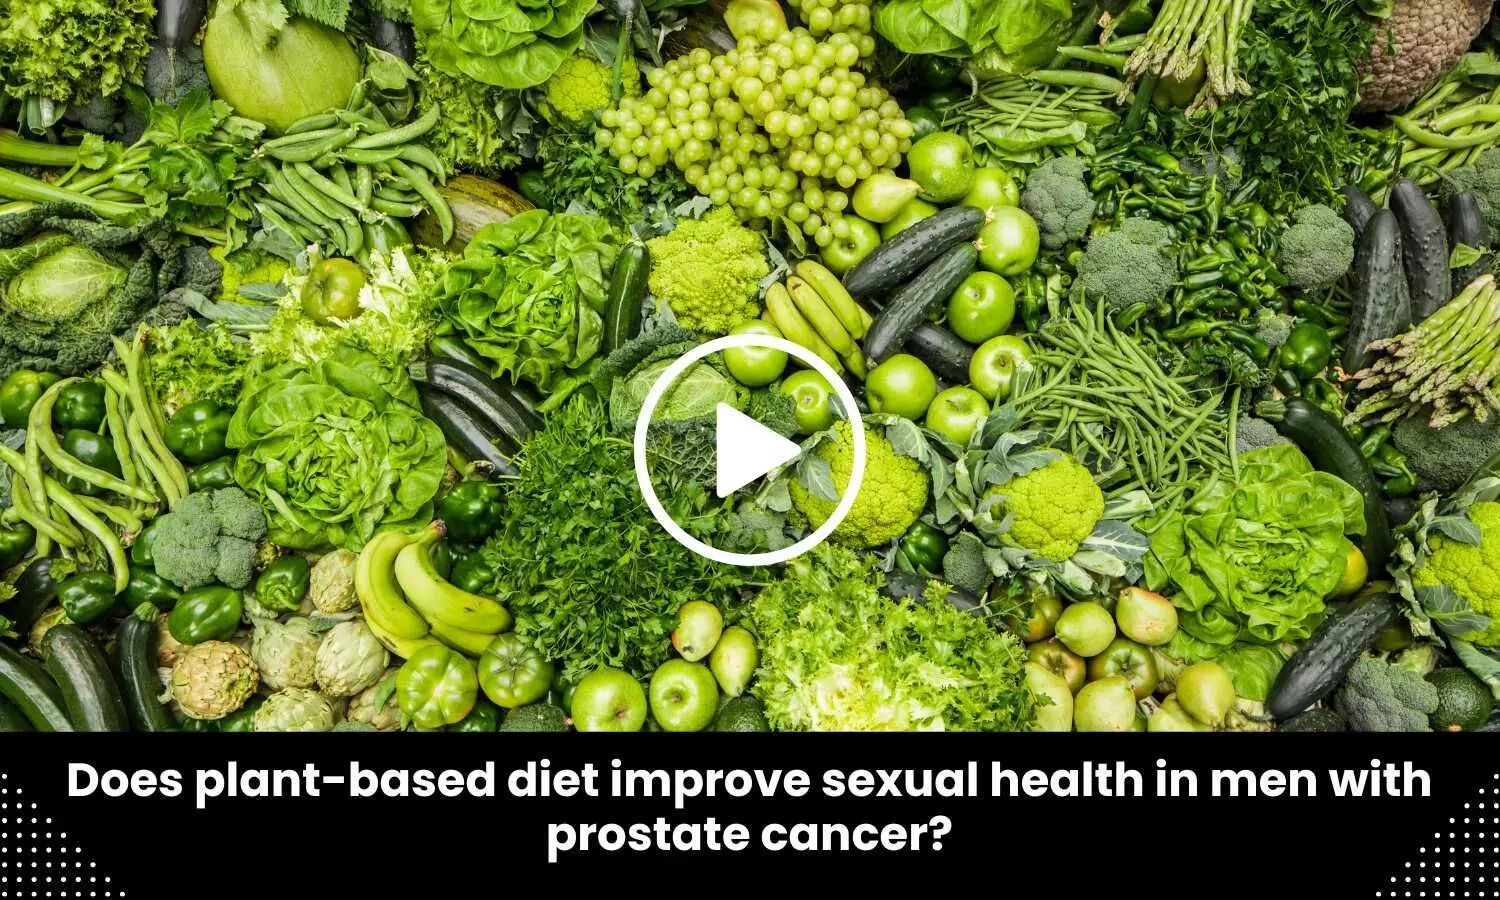 Does plant-based diet improve sexual health in men with prostate cancer?